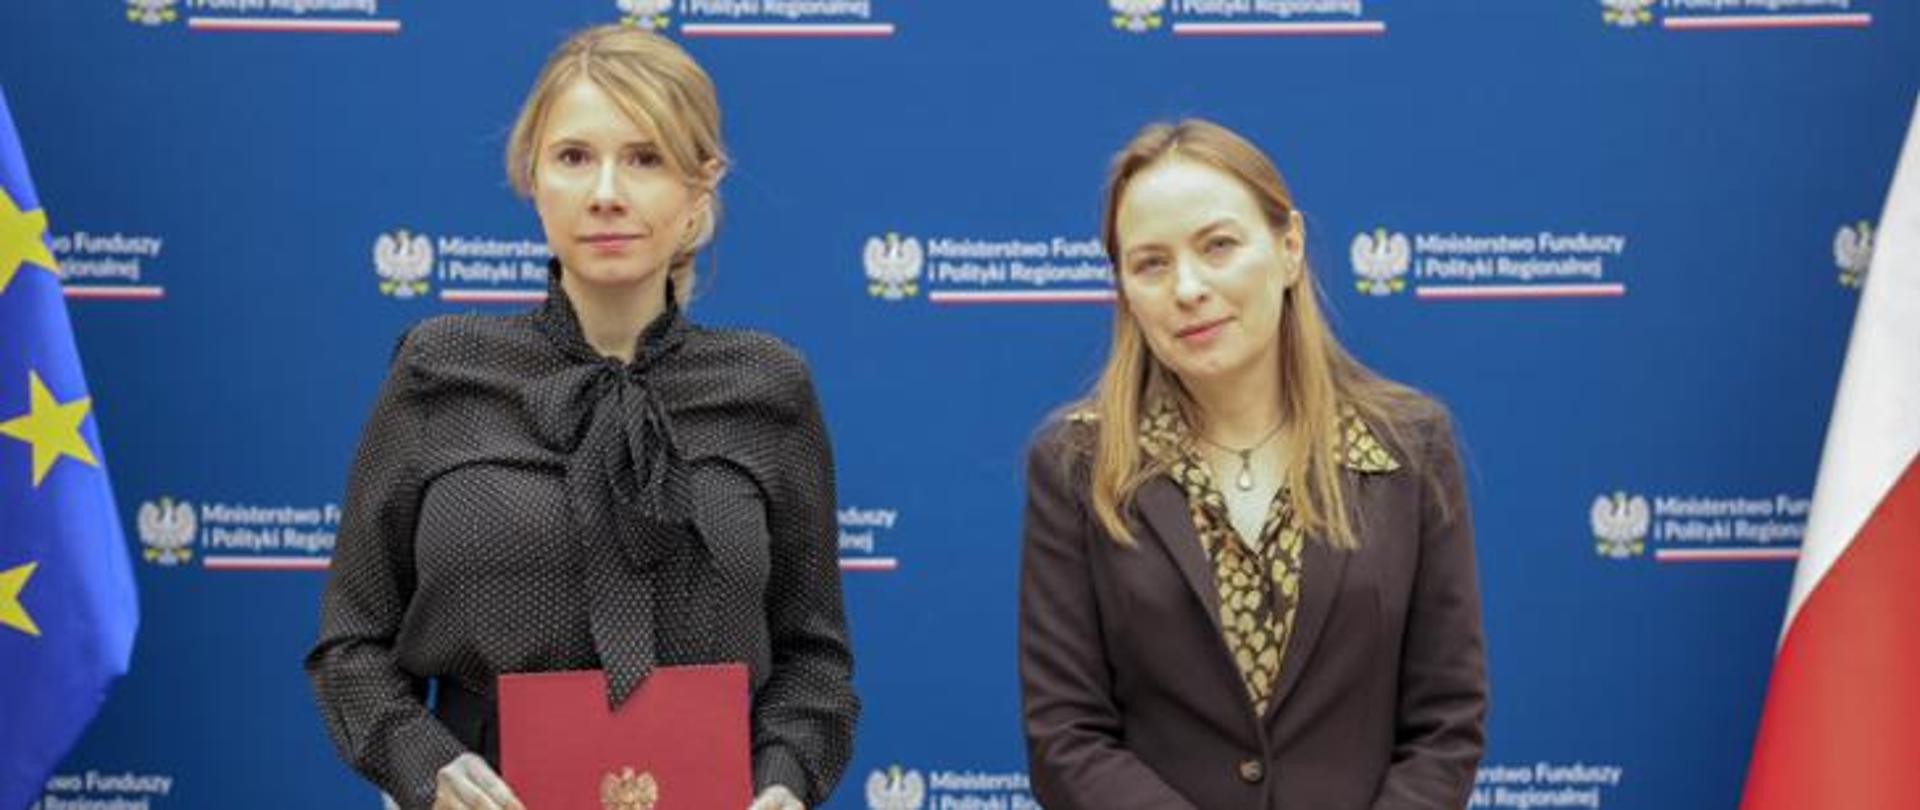 Monika Sikora appointed as deputy minister at the Ministry of Funds and Regional Policy